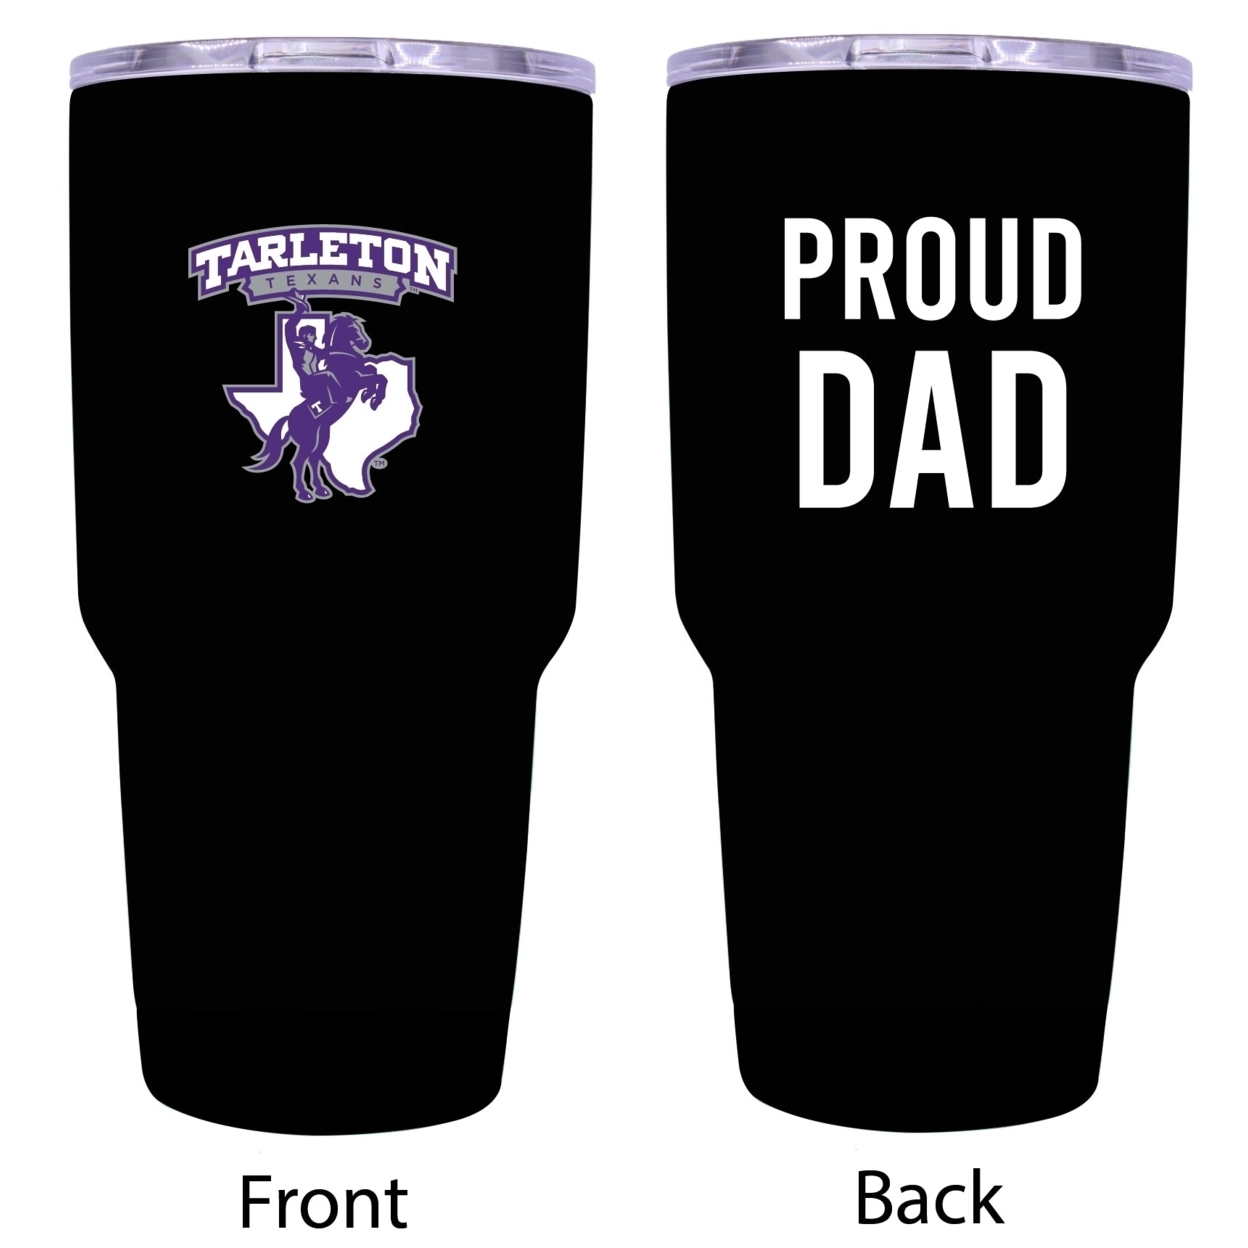 Tarleton State University Proud Dad 24 Oz Insulated Stainless Steel Tumblers Choose Your Color.